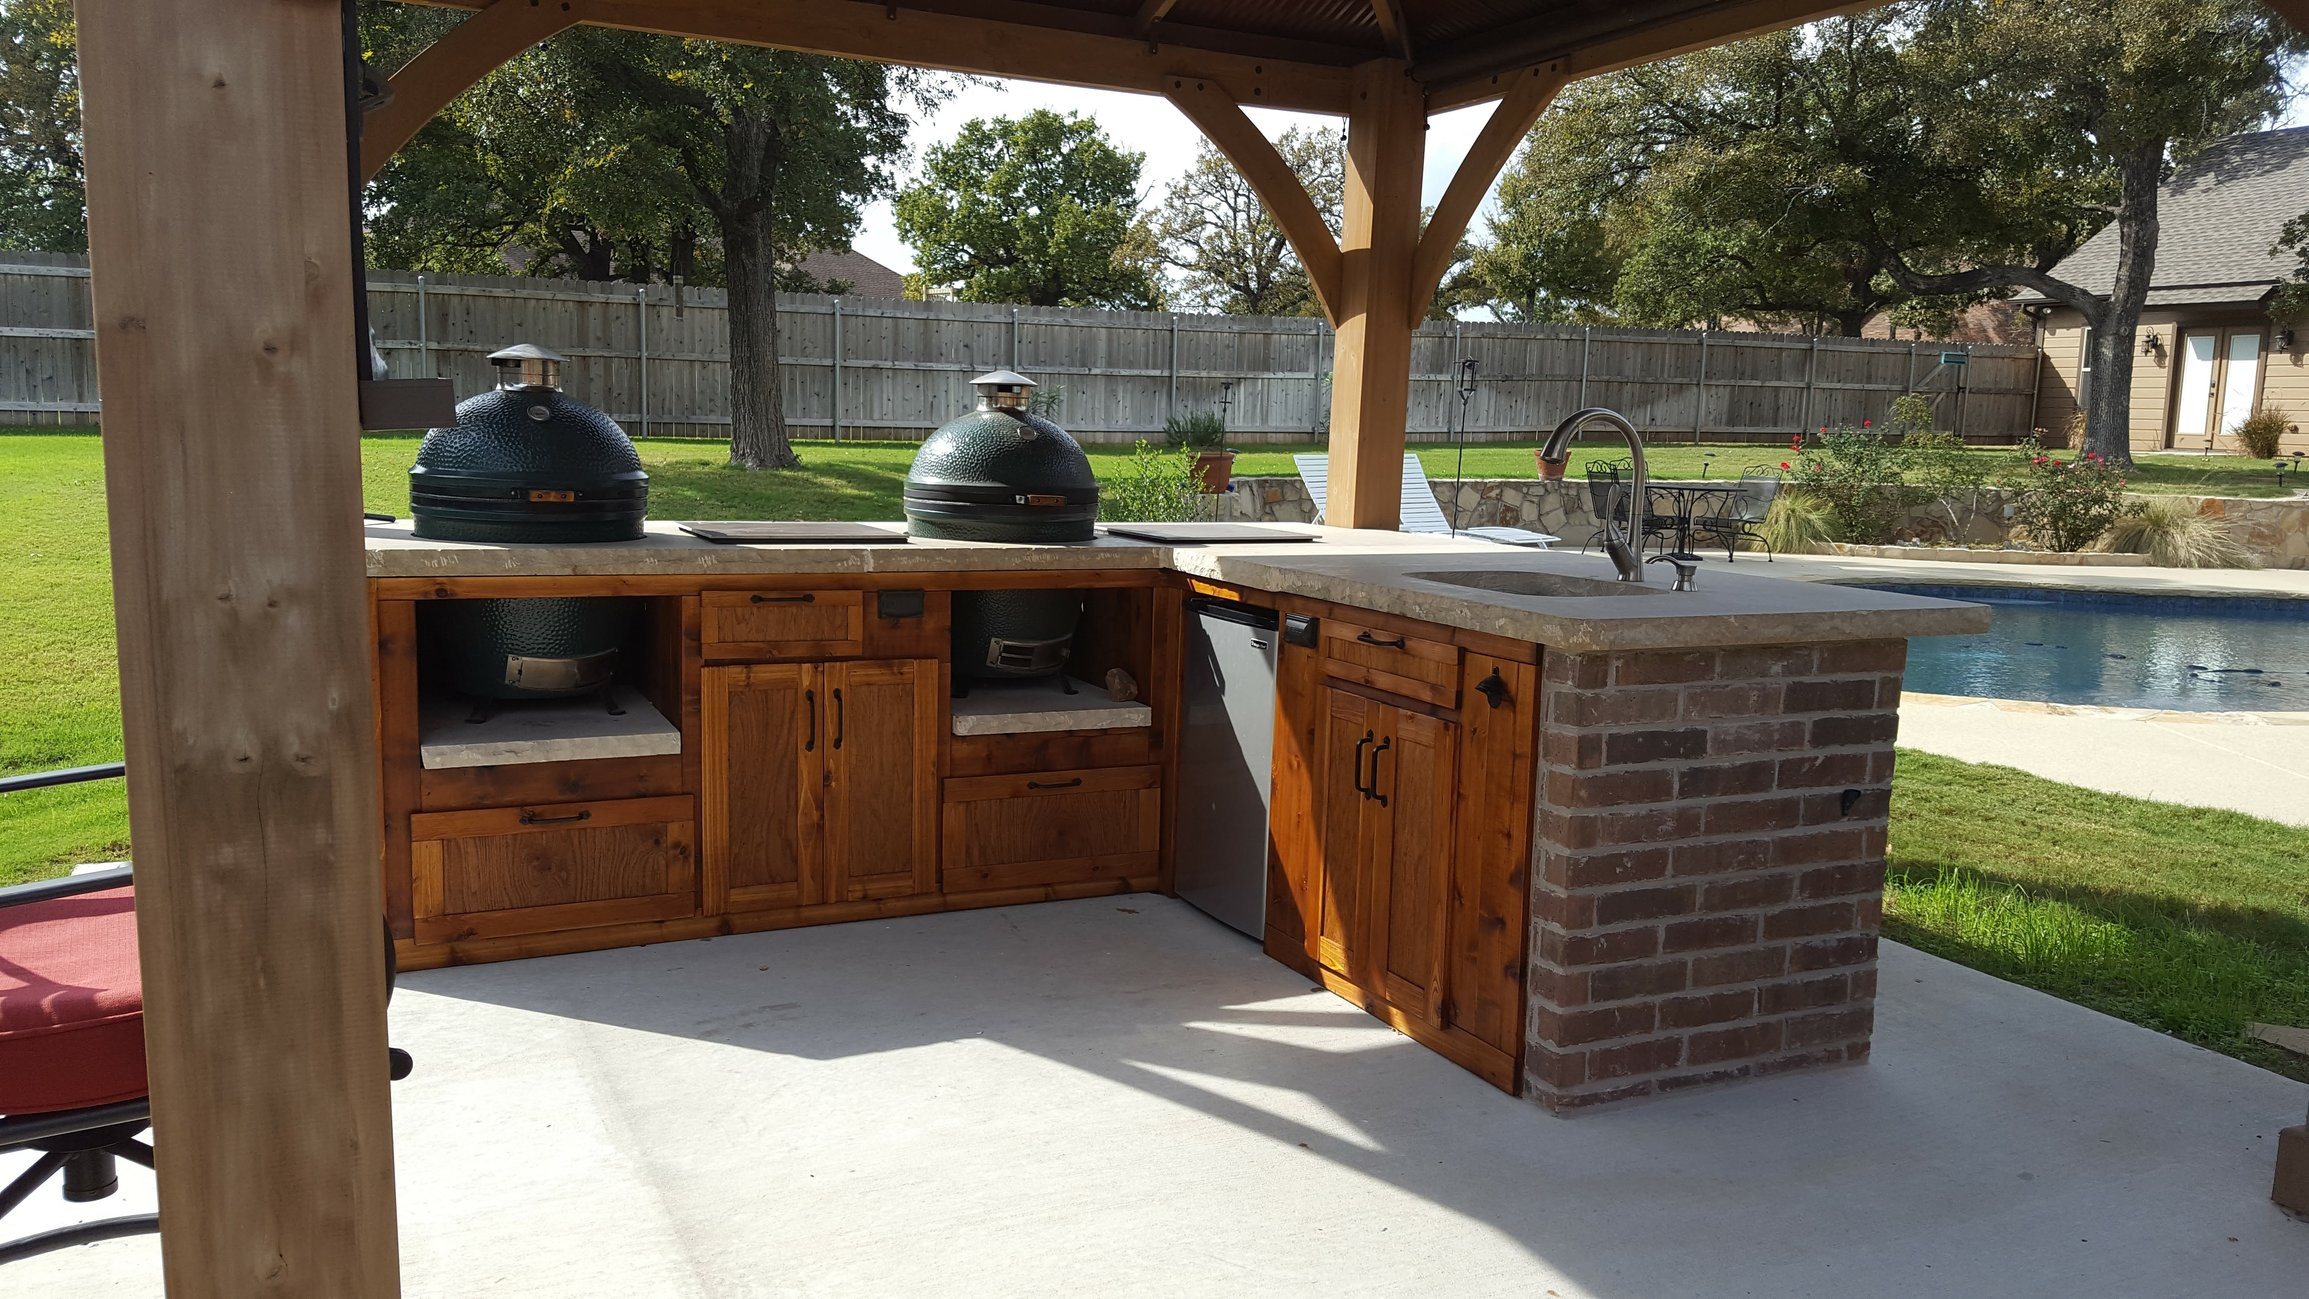 Green Egg Outdoor Kitchen
 Outdoor Kitchen Done with — Big Green Egg